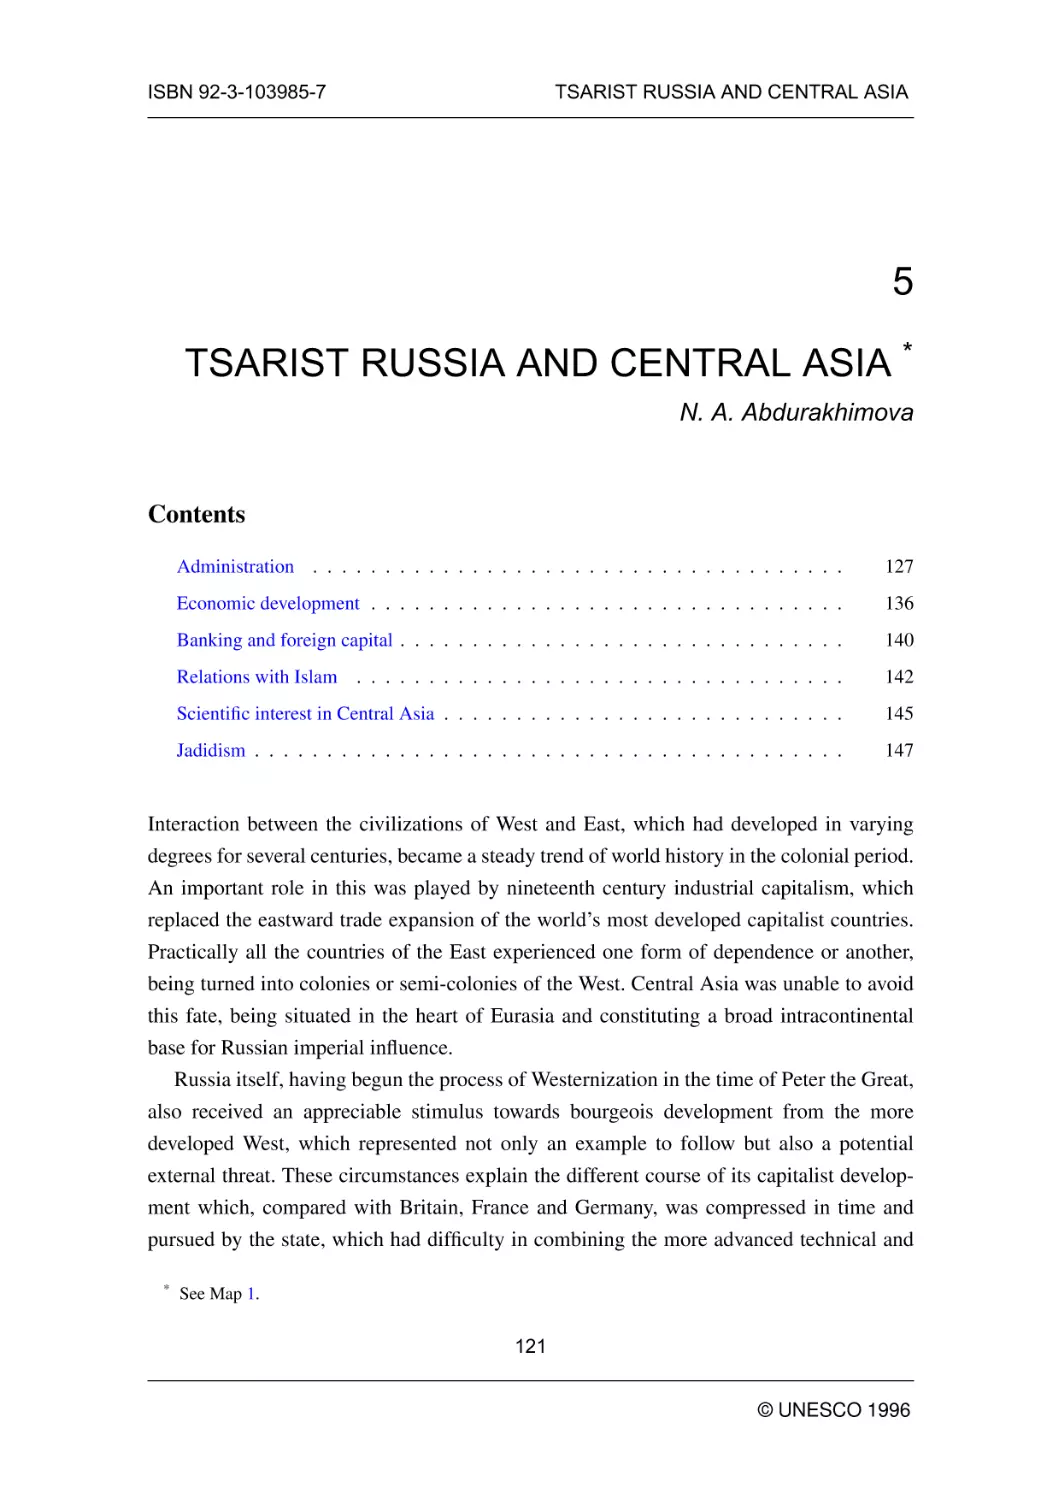 TSARIST RUSSIA AND CENTRAL ASIA